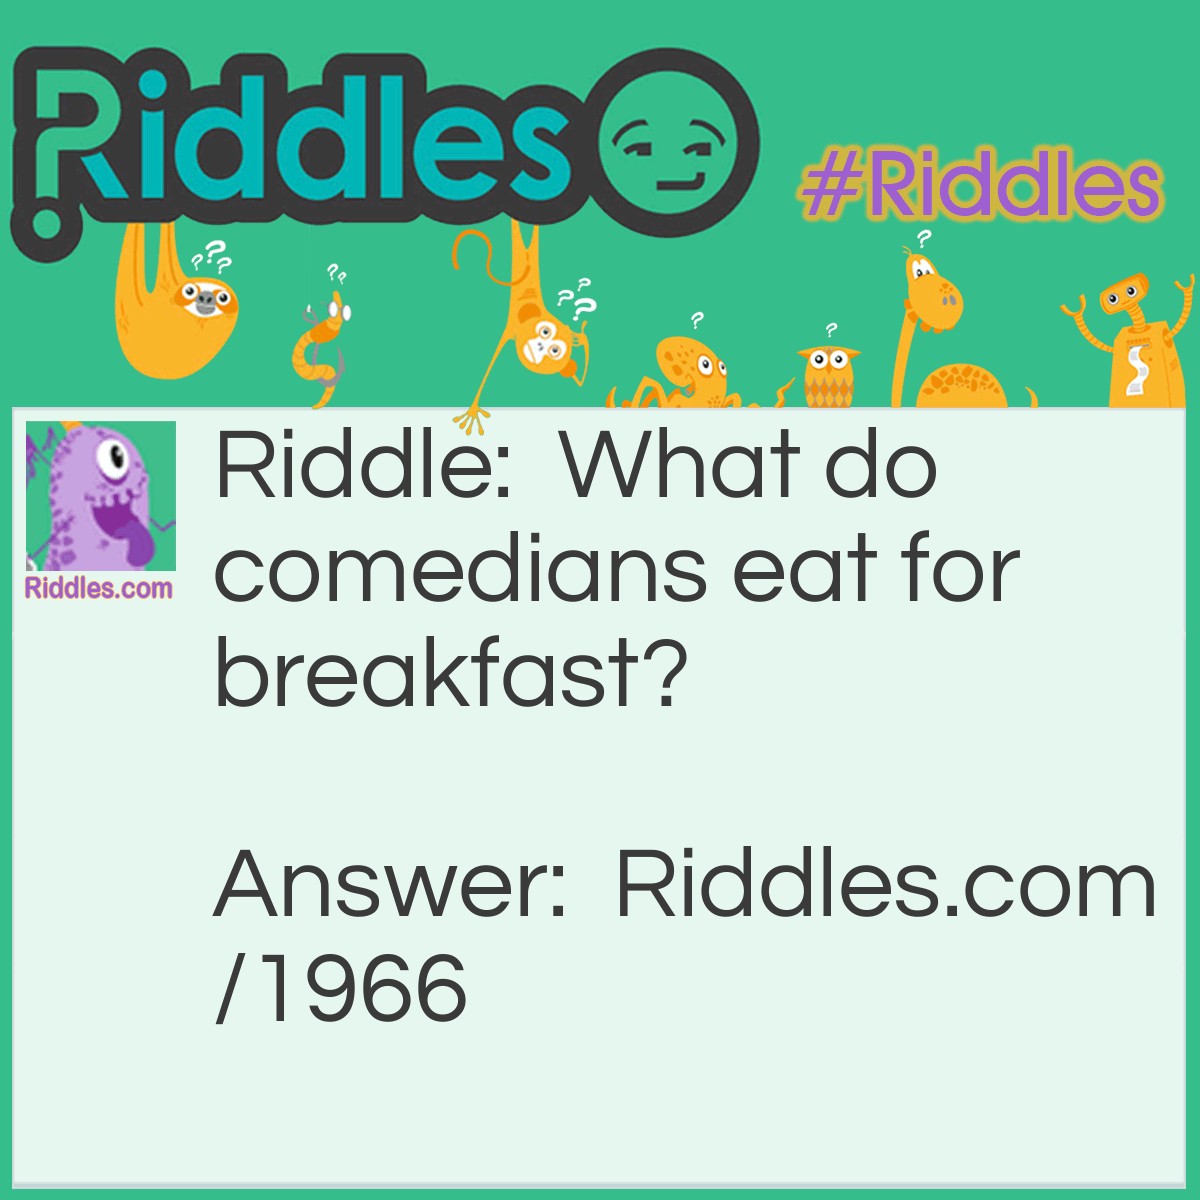 Riddle: What do comedians eat for breakfast? Answer: Corny flakes.